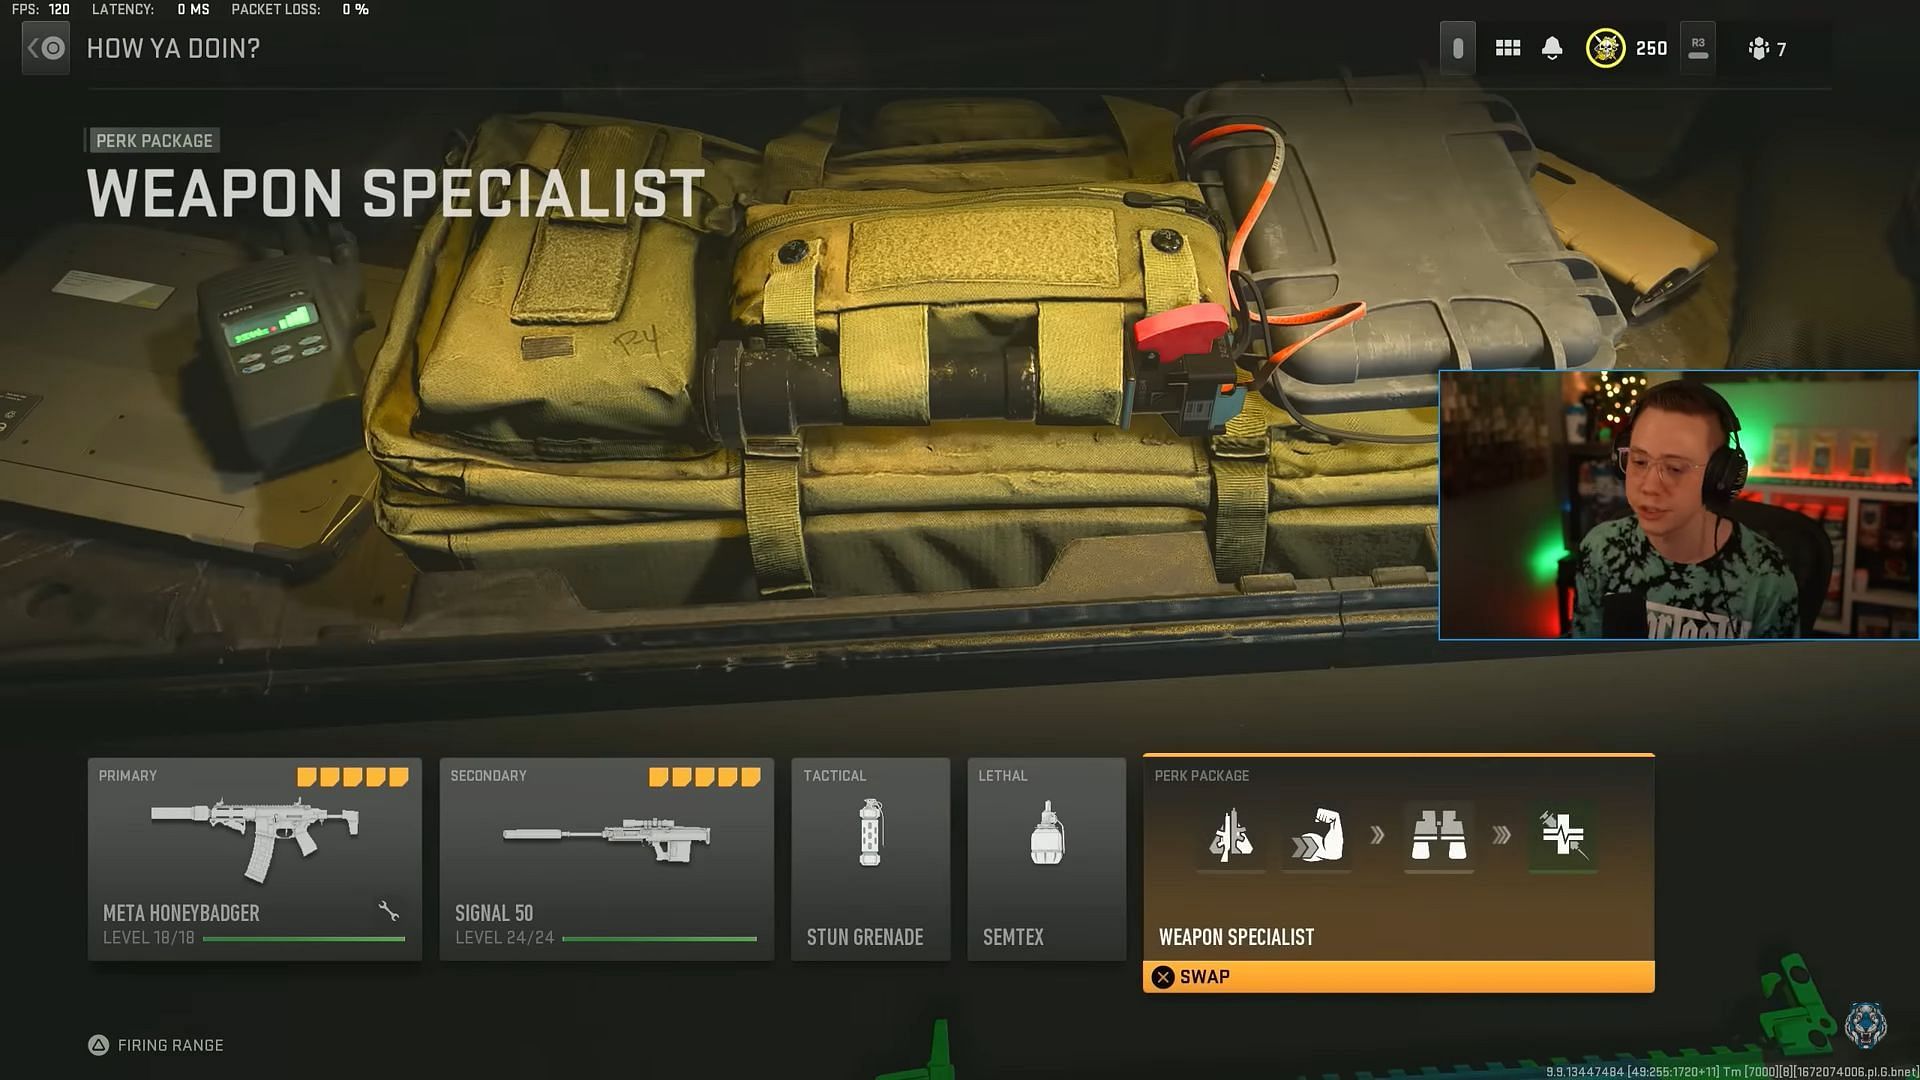 Equipment and Perk Package in Warzone 2 Season 1 Reloaded (Image via Activision and YouTube/WhosImmortal)